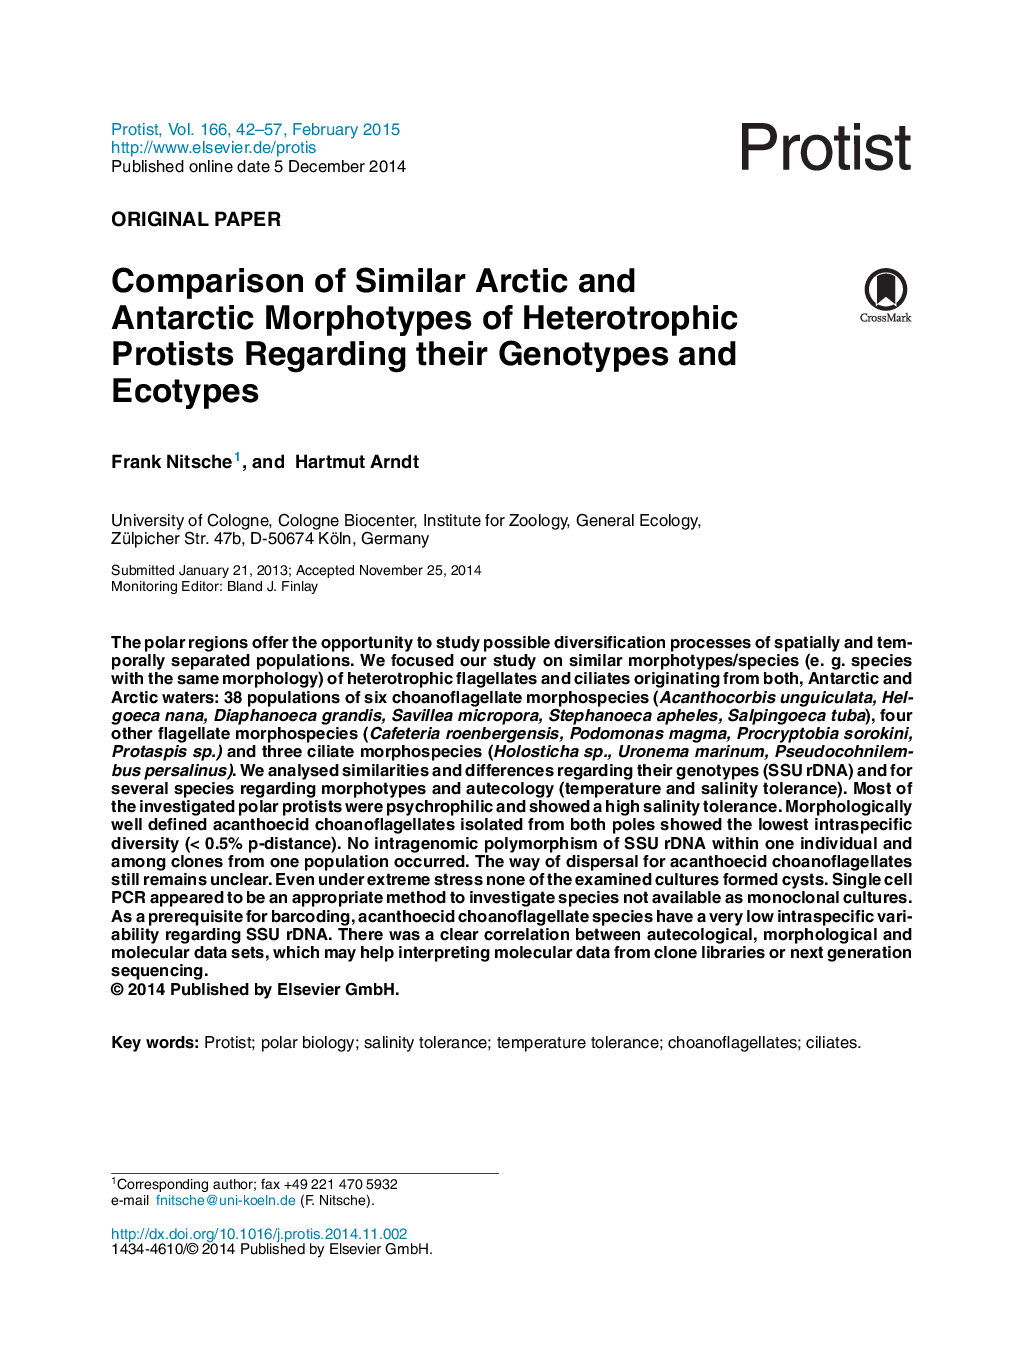 Comparison of Similar Arctic and Antarctic Morphotypes of Heterotrophic Protists Regarding their Genotypes and Ecotypes